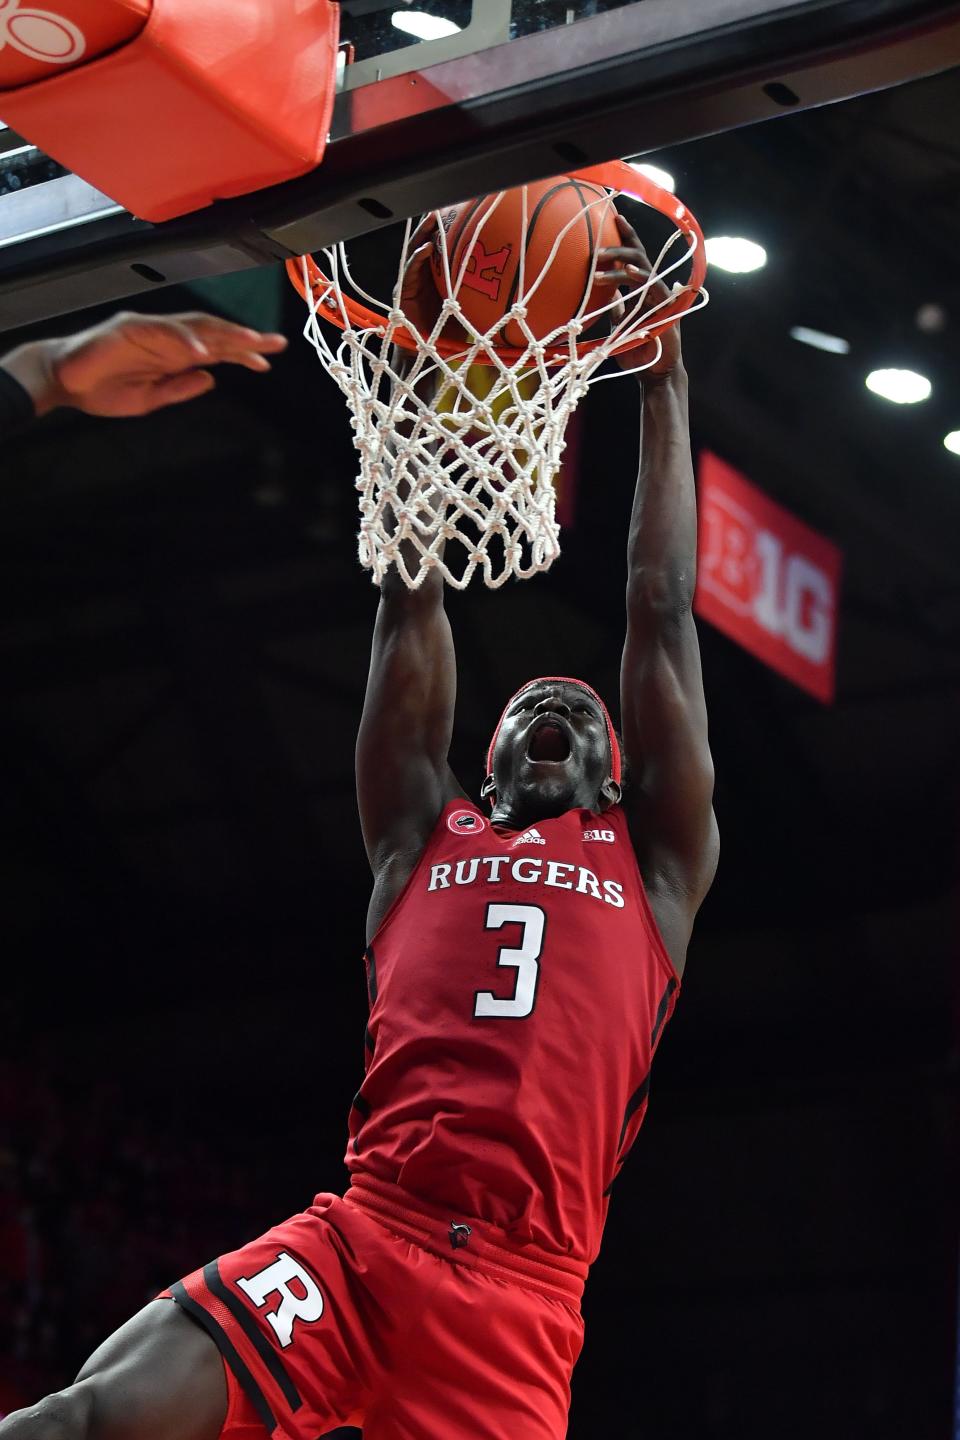 Dec 9, 2021; Piscataway, New Jersey, USA; Rutgers Scarlet Knights forward Mawot Mag (3) dunks the ball against the Purdue Boilermakers during the second half at Jersey Mike's Arena. Mandatory Credit: Catalina Fragoso-USA TODAY Sports